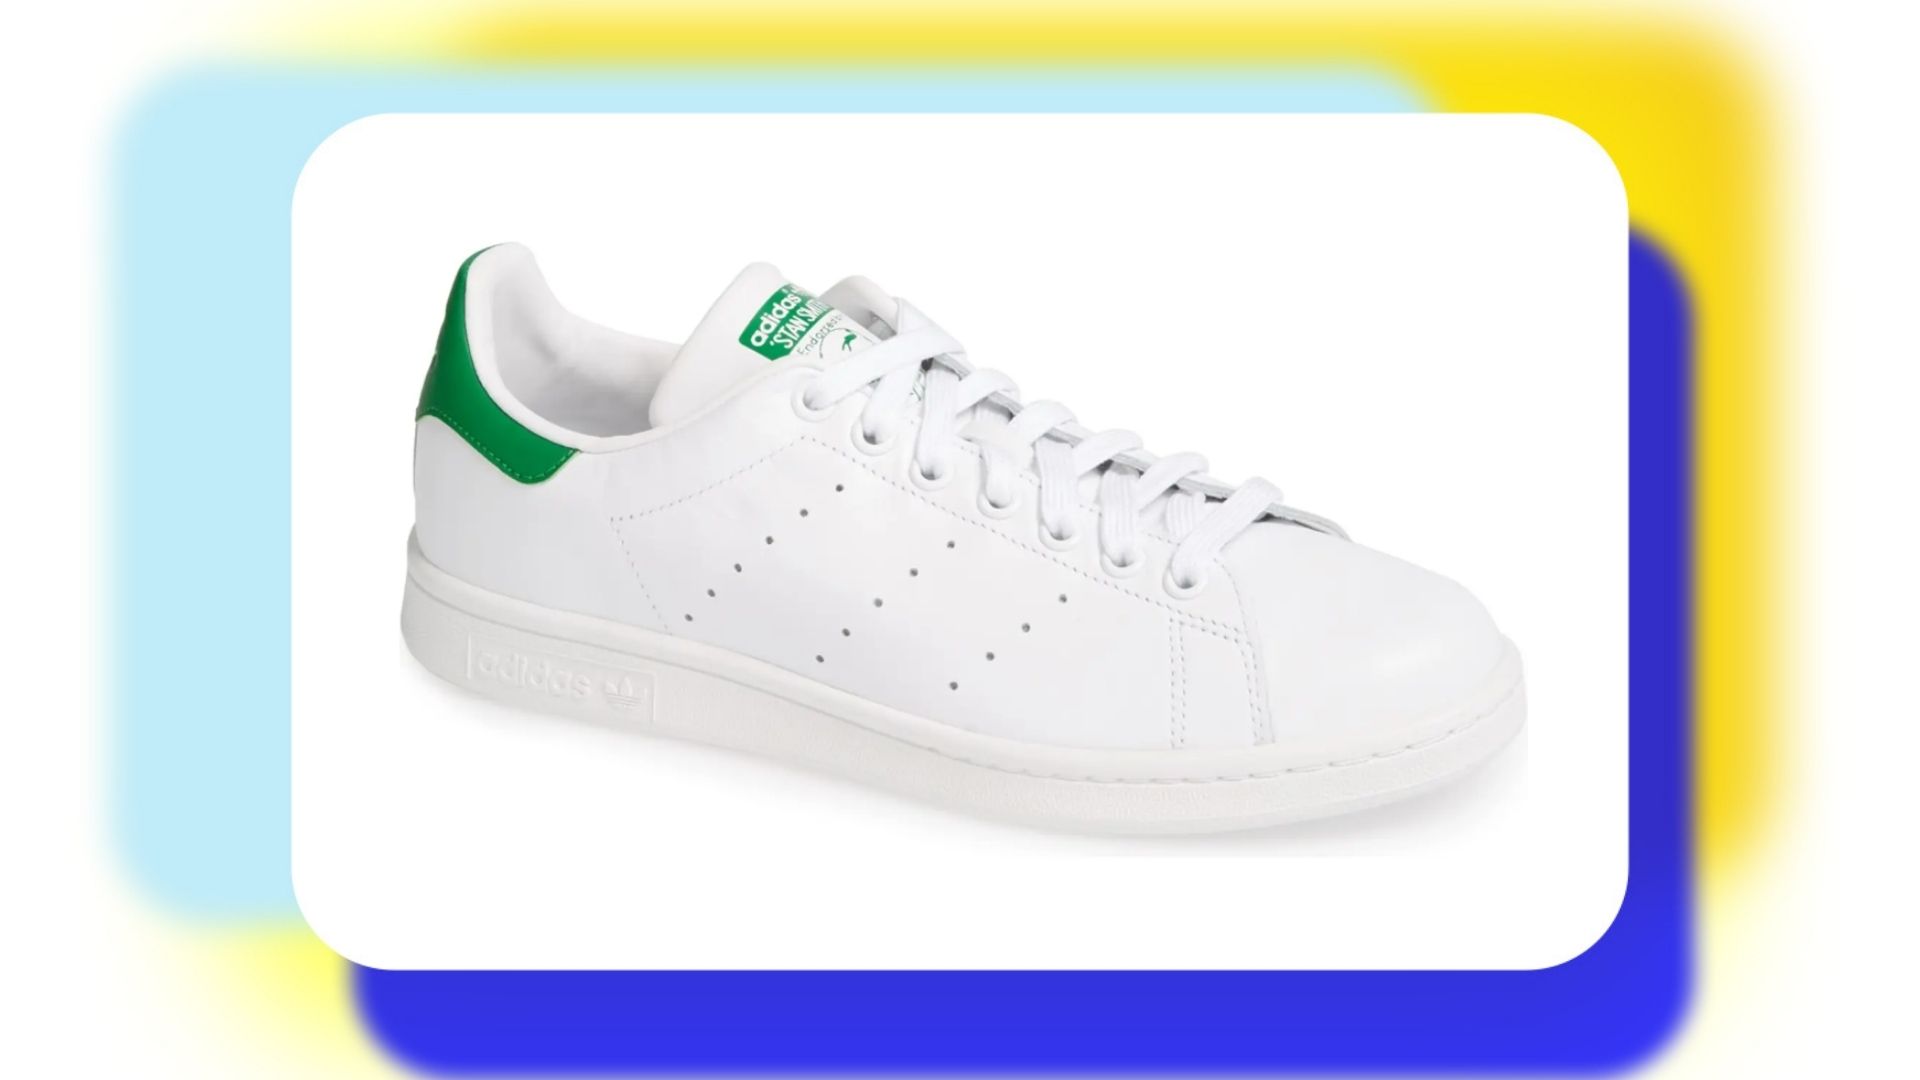 Adidas' Stan Smith sneakers are the 